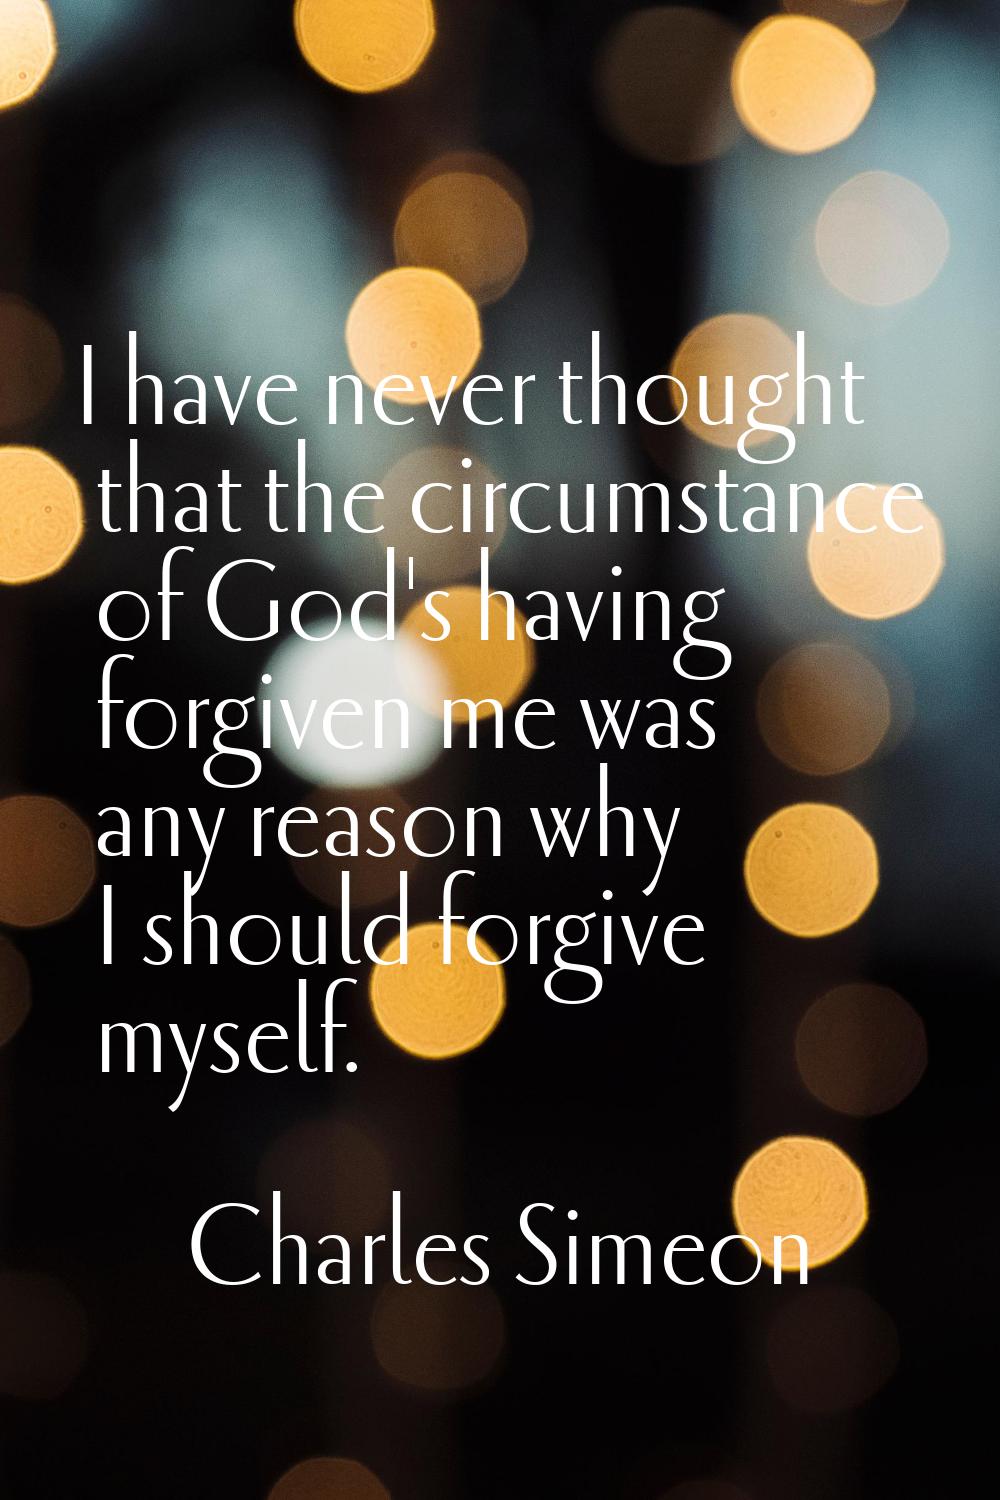 I have never thought that the circumstance of God's having forgiven me was any reason why I should 